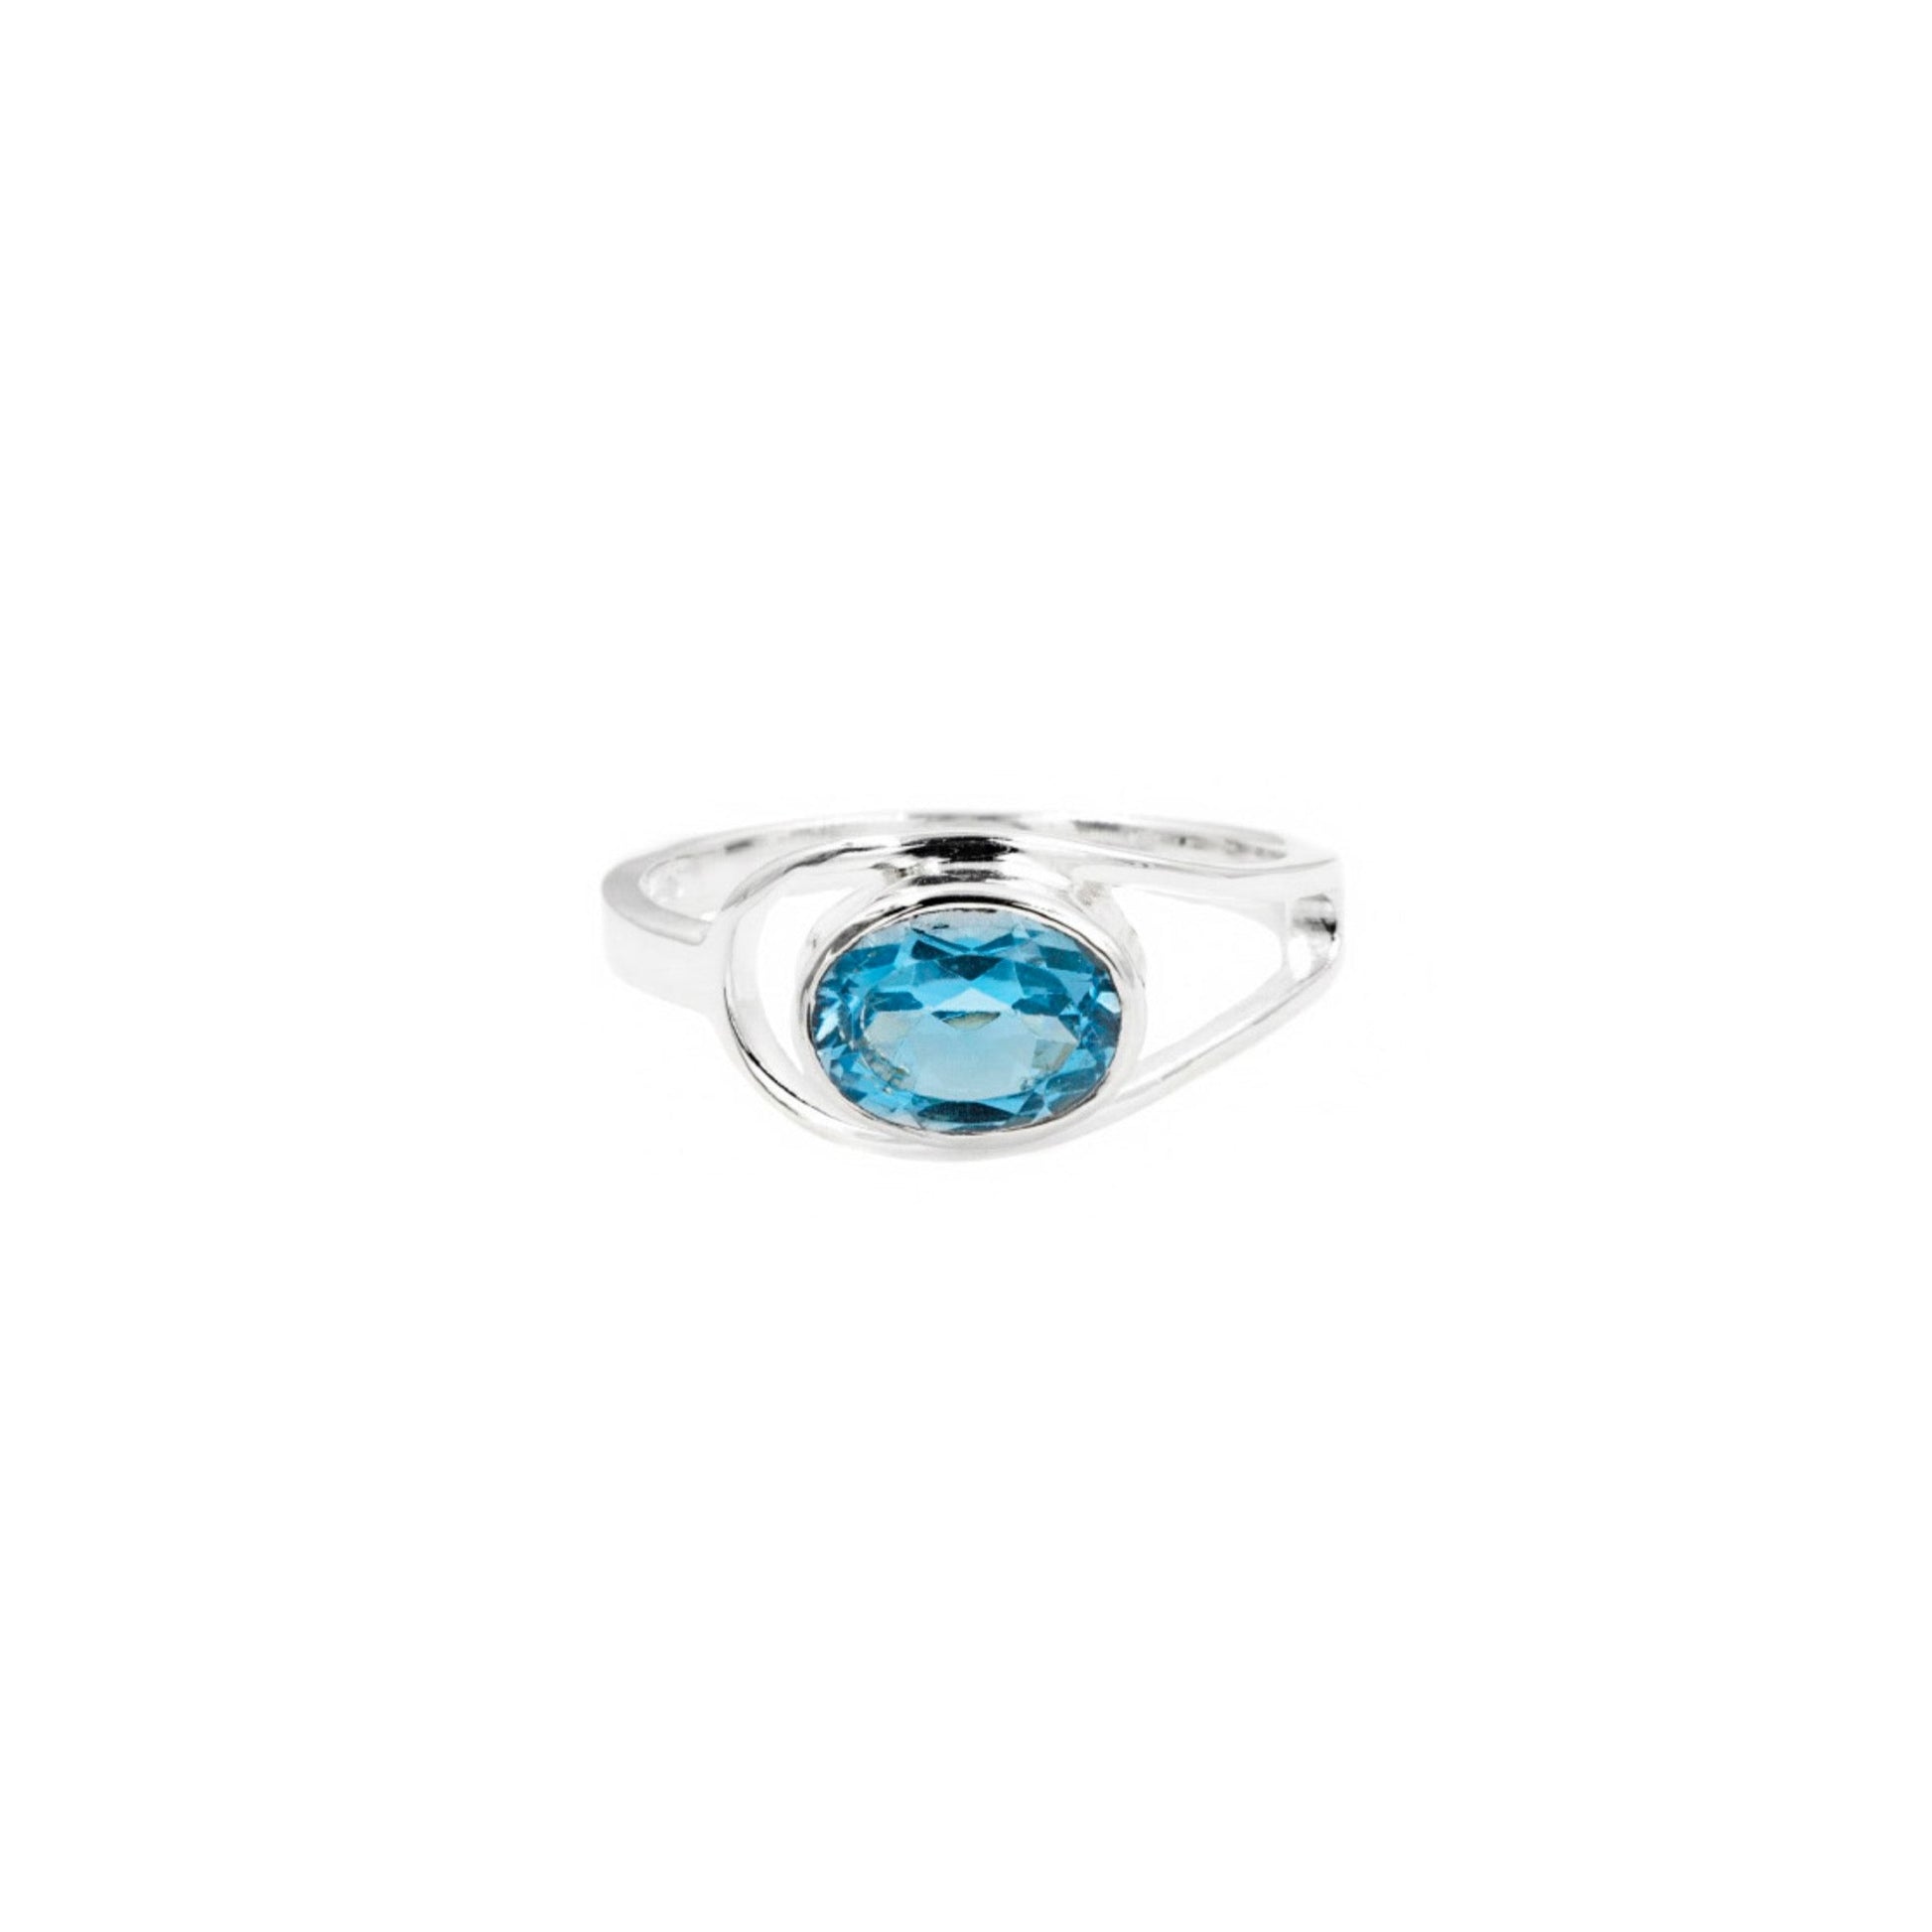 Blue Topaz Oval Ring Sterling Silver - Twisted Earth Artistry